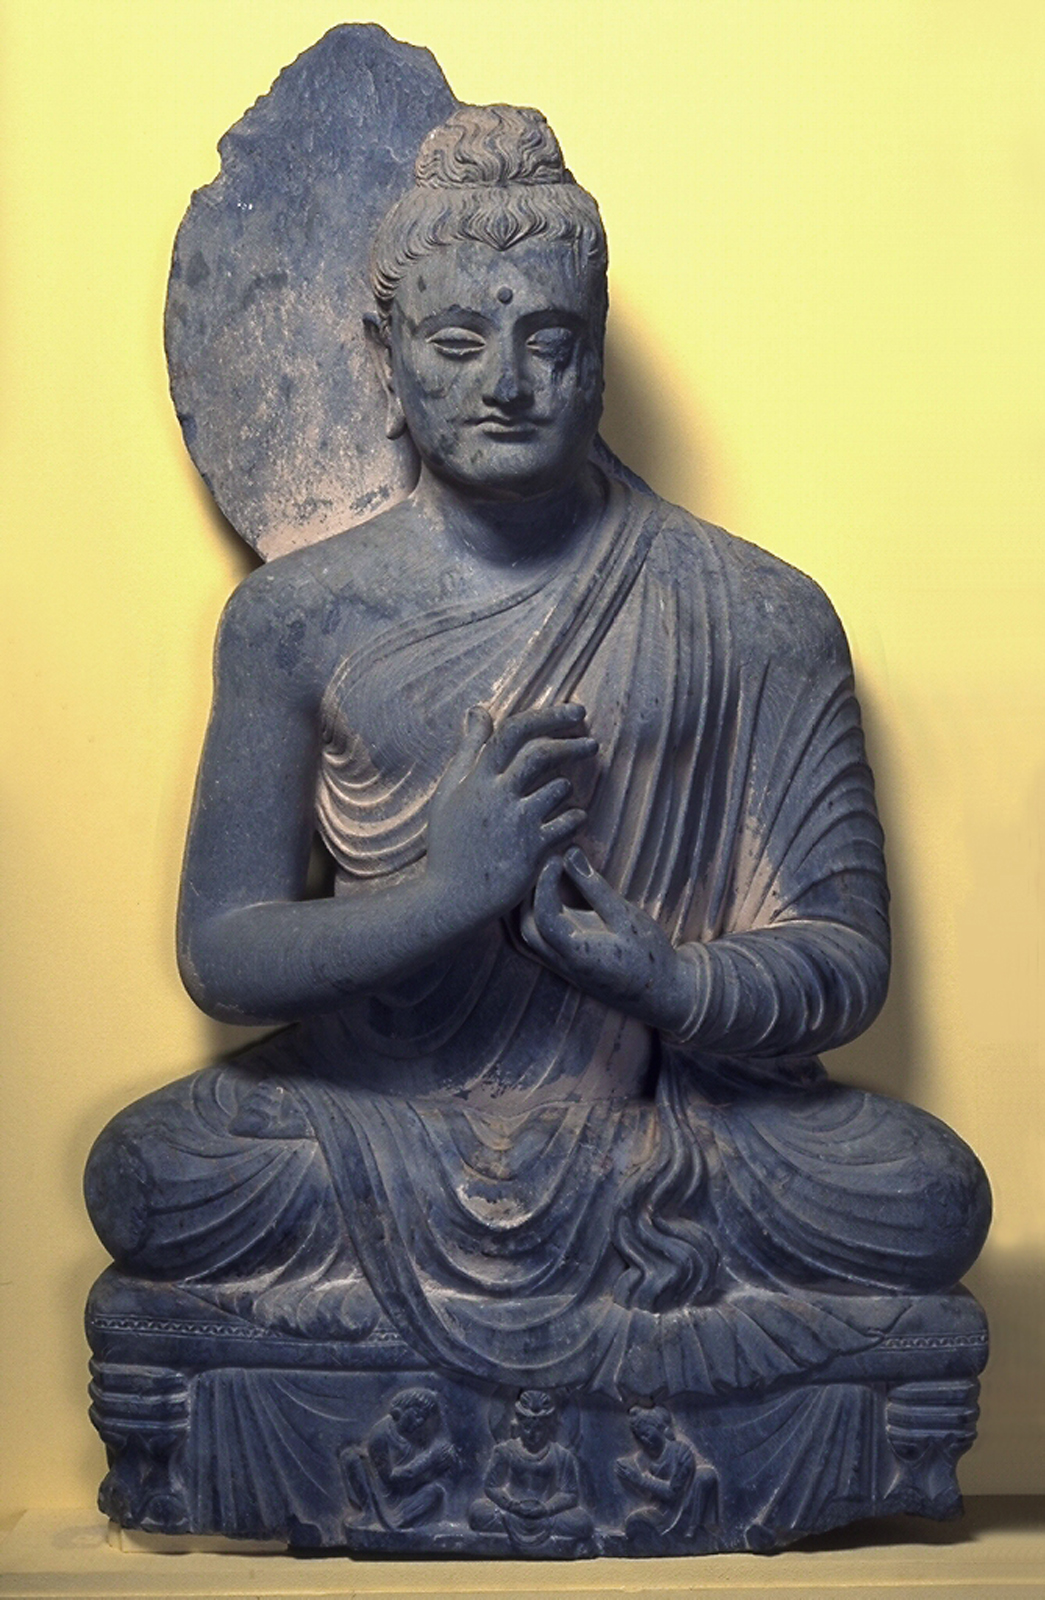 Seated Lotus Position Indian Buddha Statue